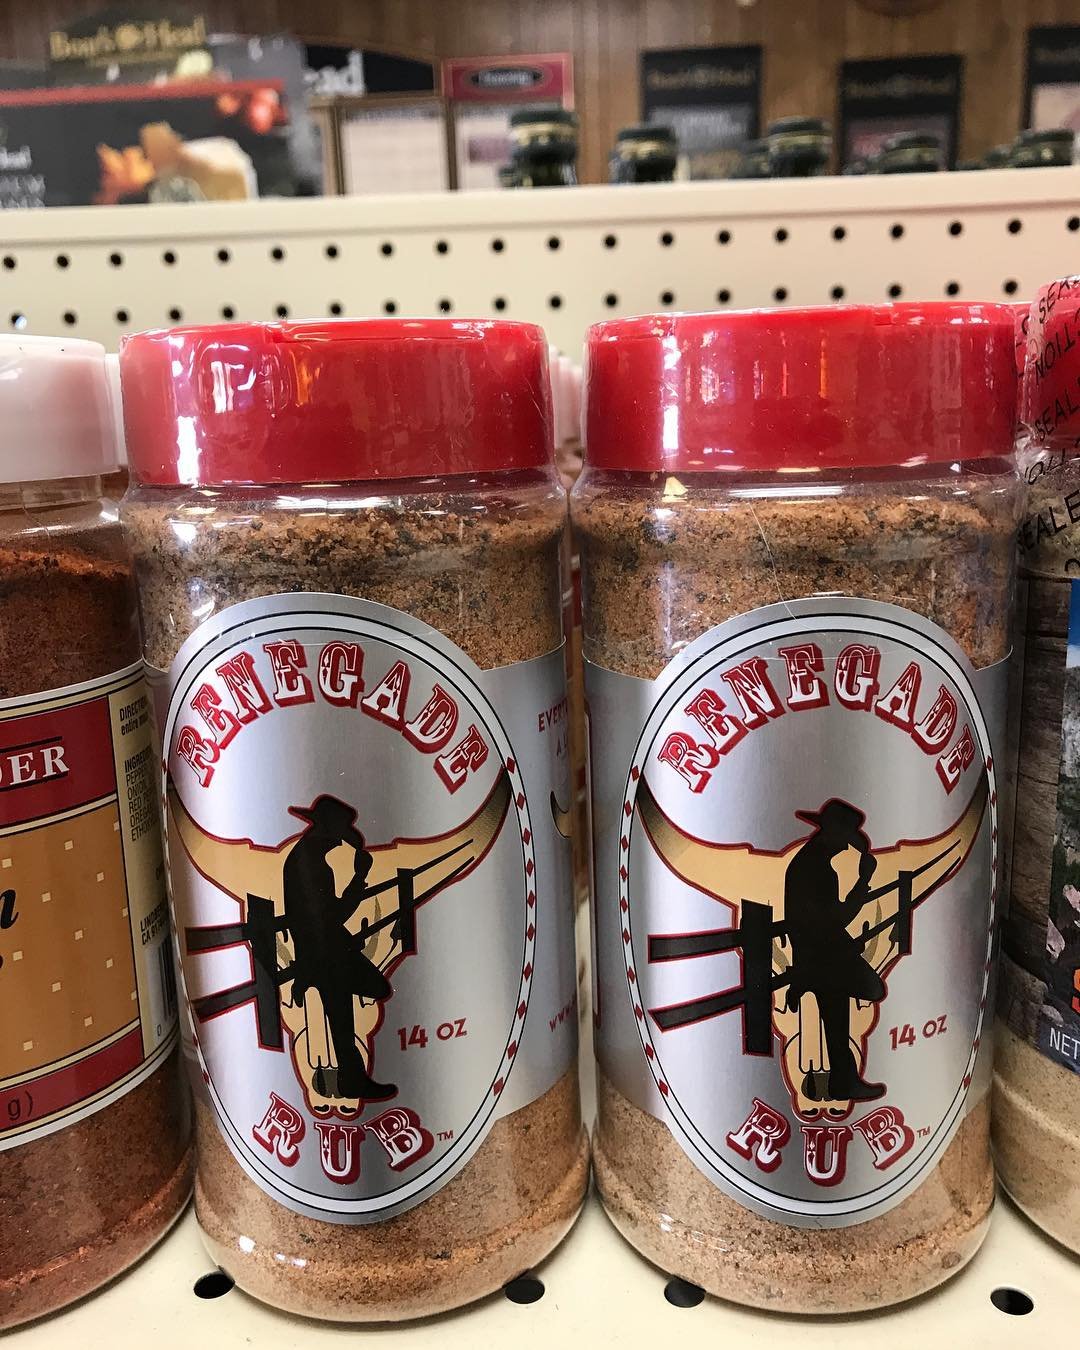 Renegade for Sale at Bob's Country Meats